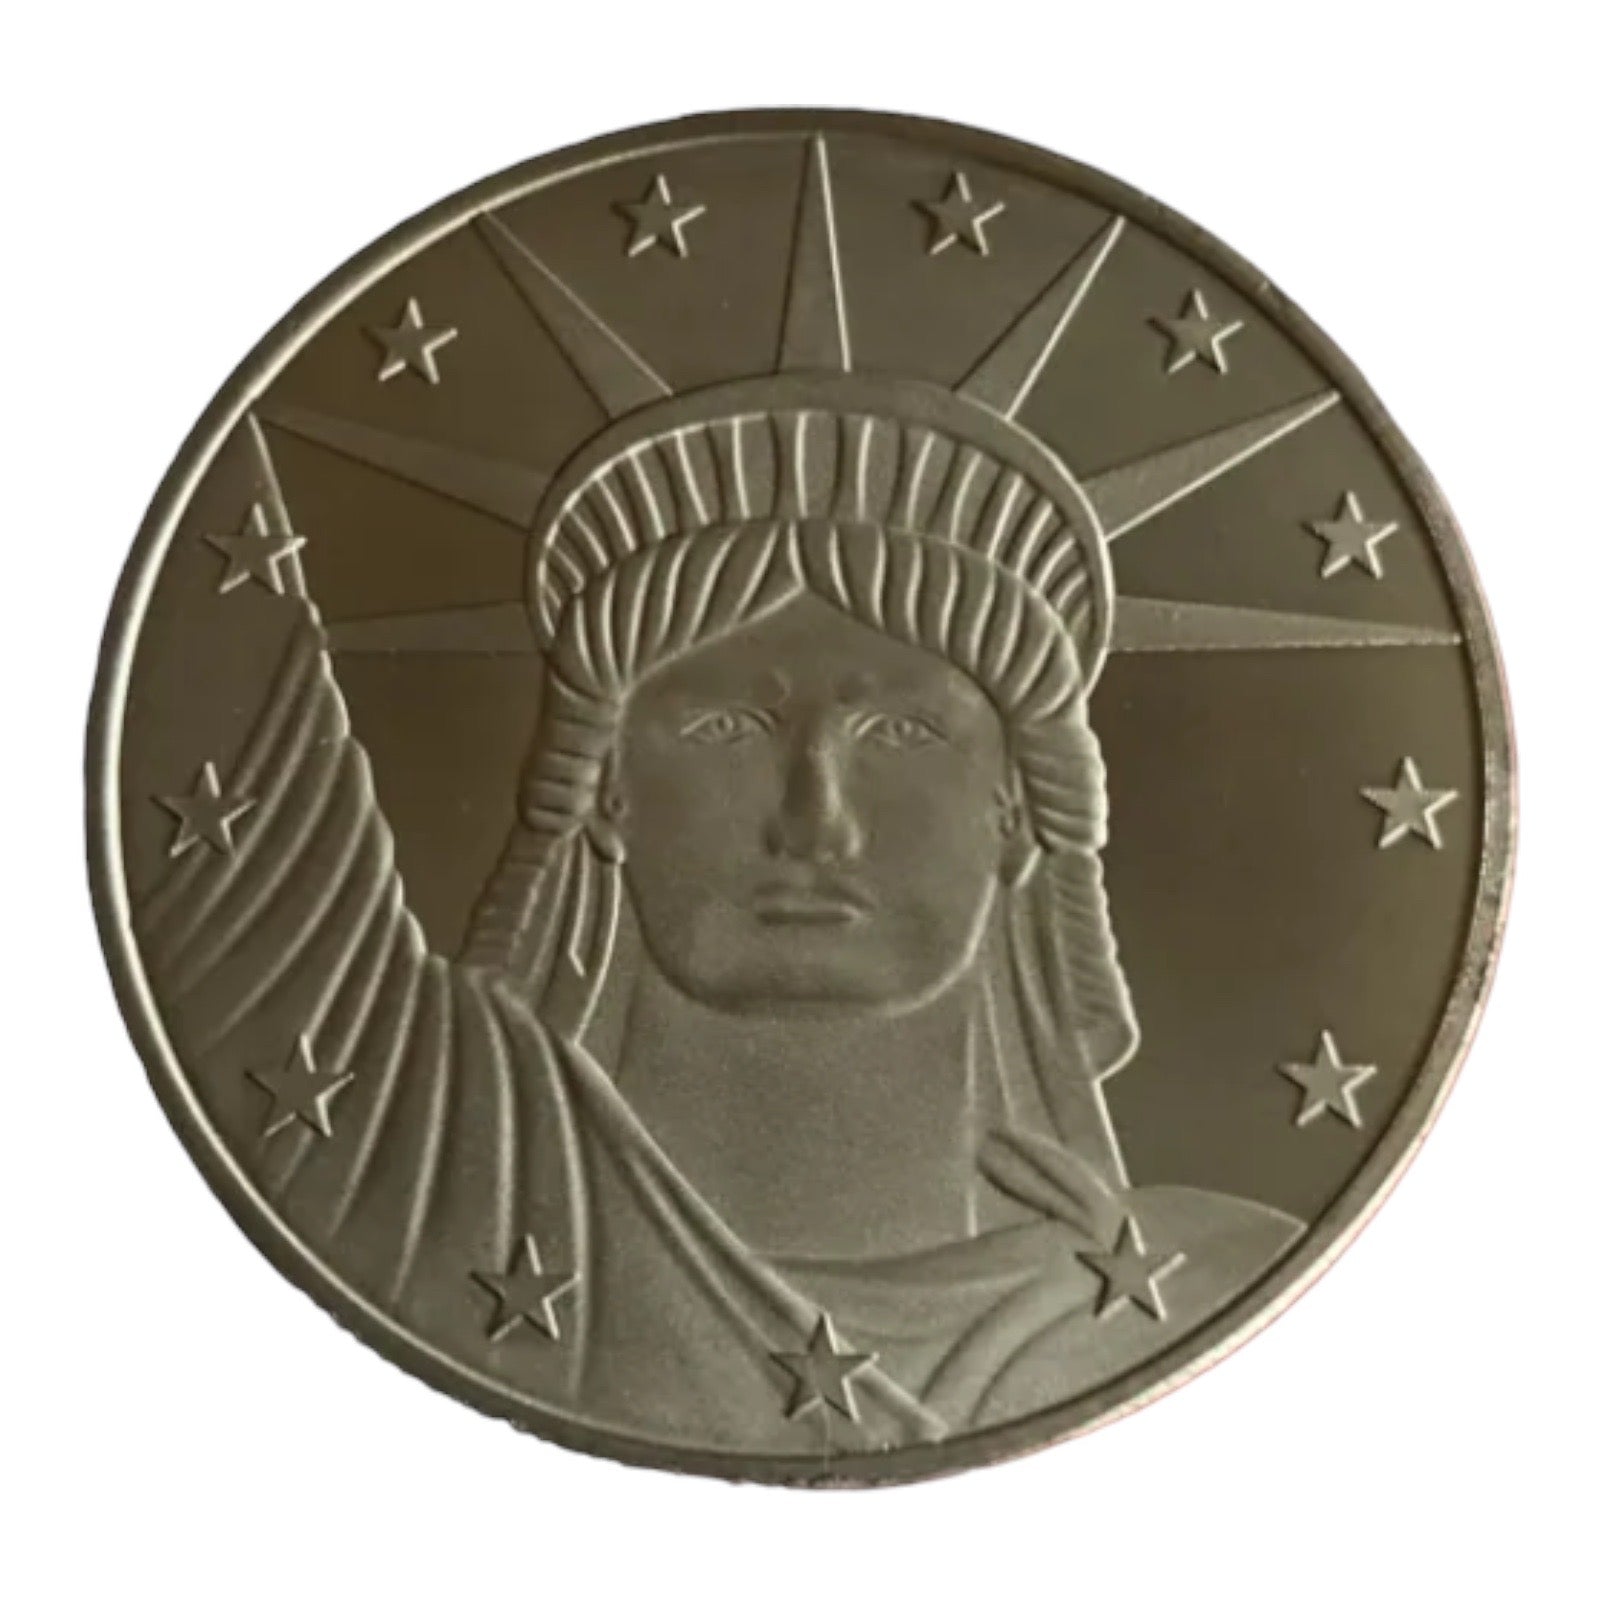 Lincoln with Lady Liberty Reverse - 1 Oz Titanium Bullion Round by Liberty Copper